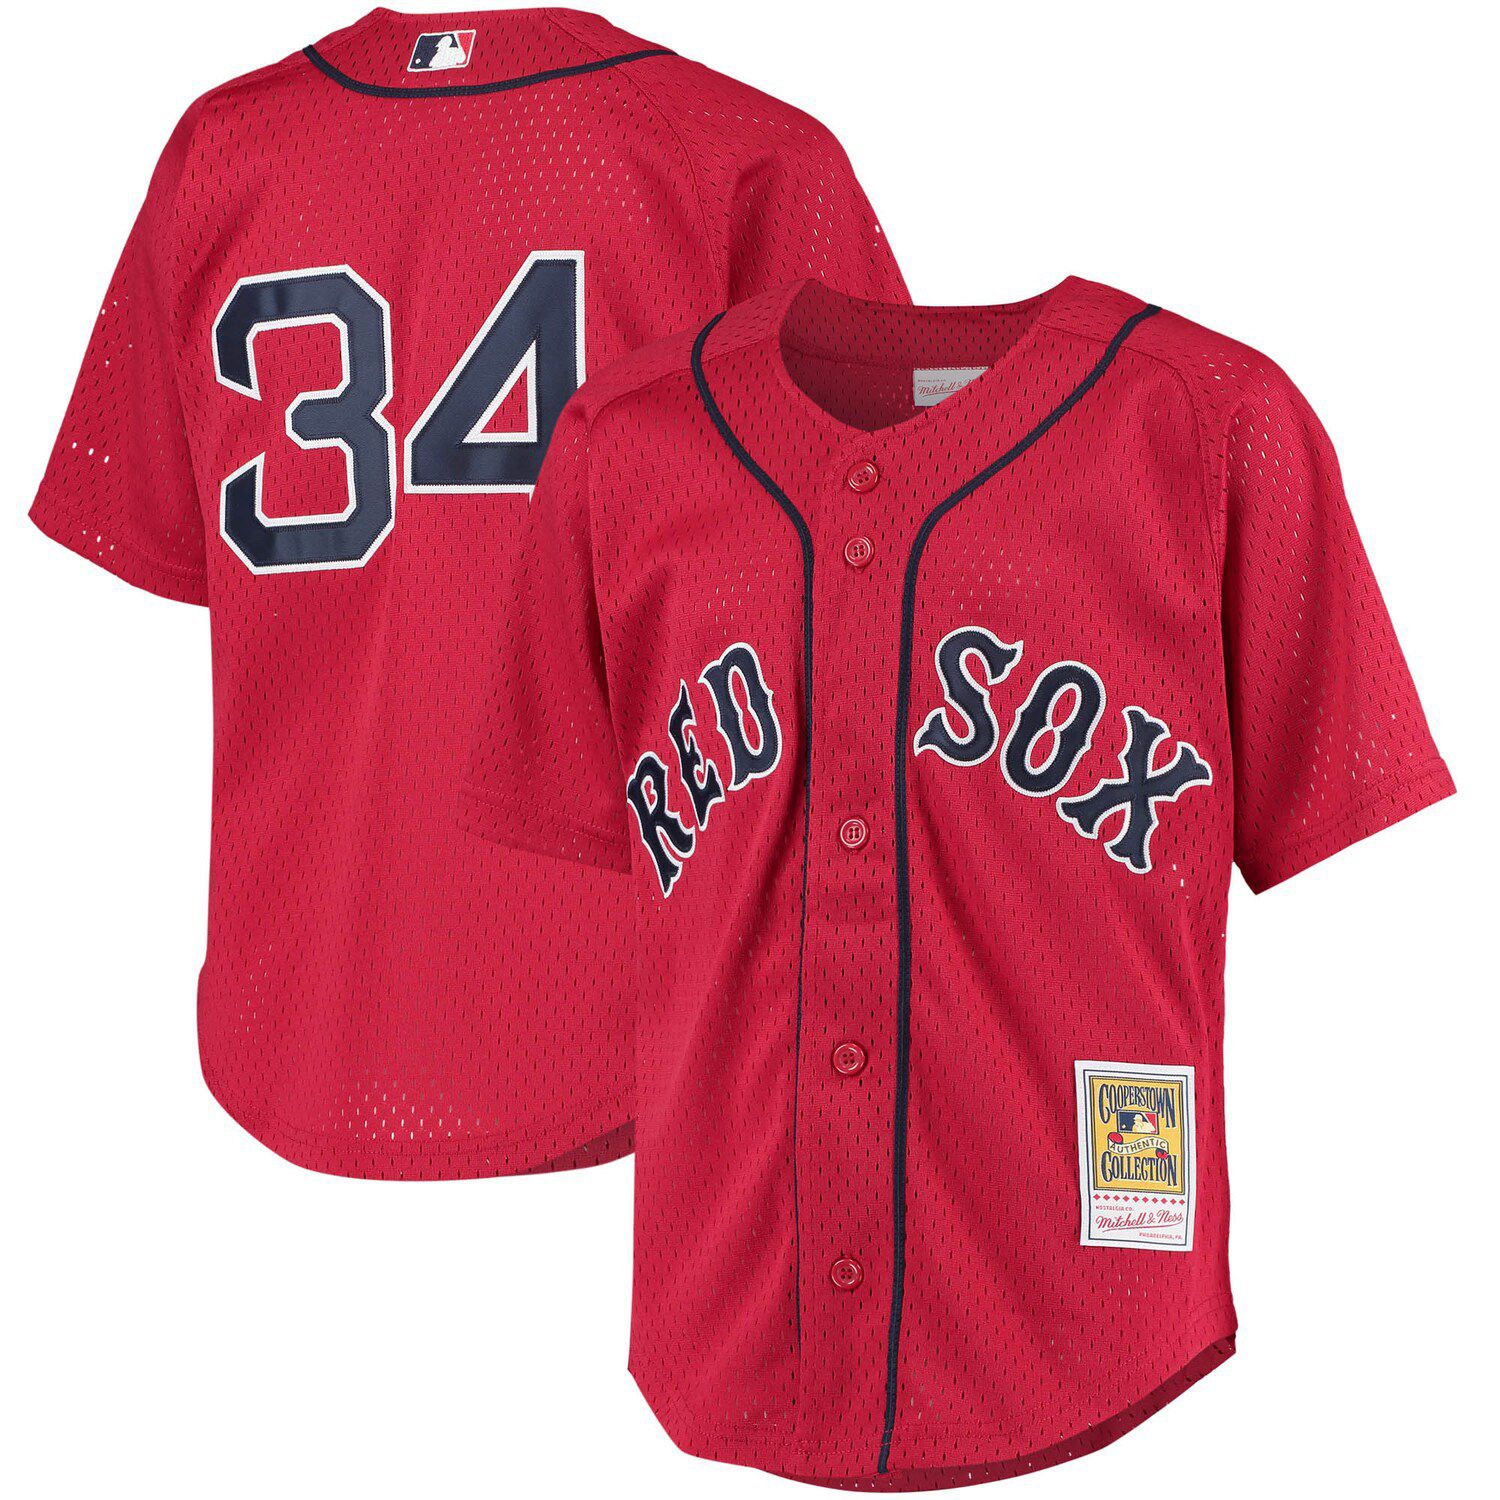 Mitchell & Ness Wade Boggs Boston Red Sox 1992 Authentic Cooperstown Collection Batting Practice Jersey XL